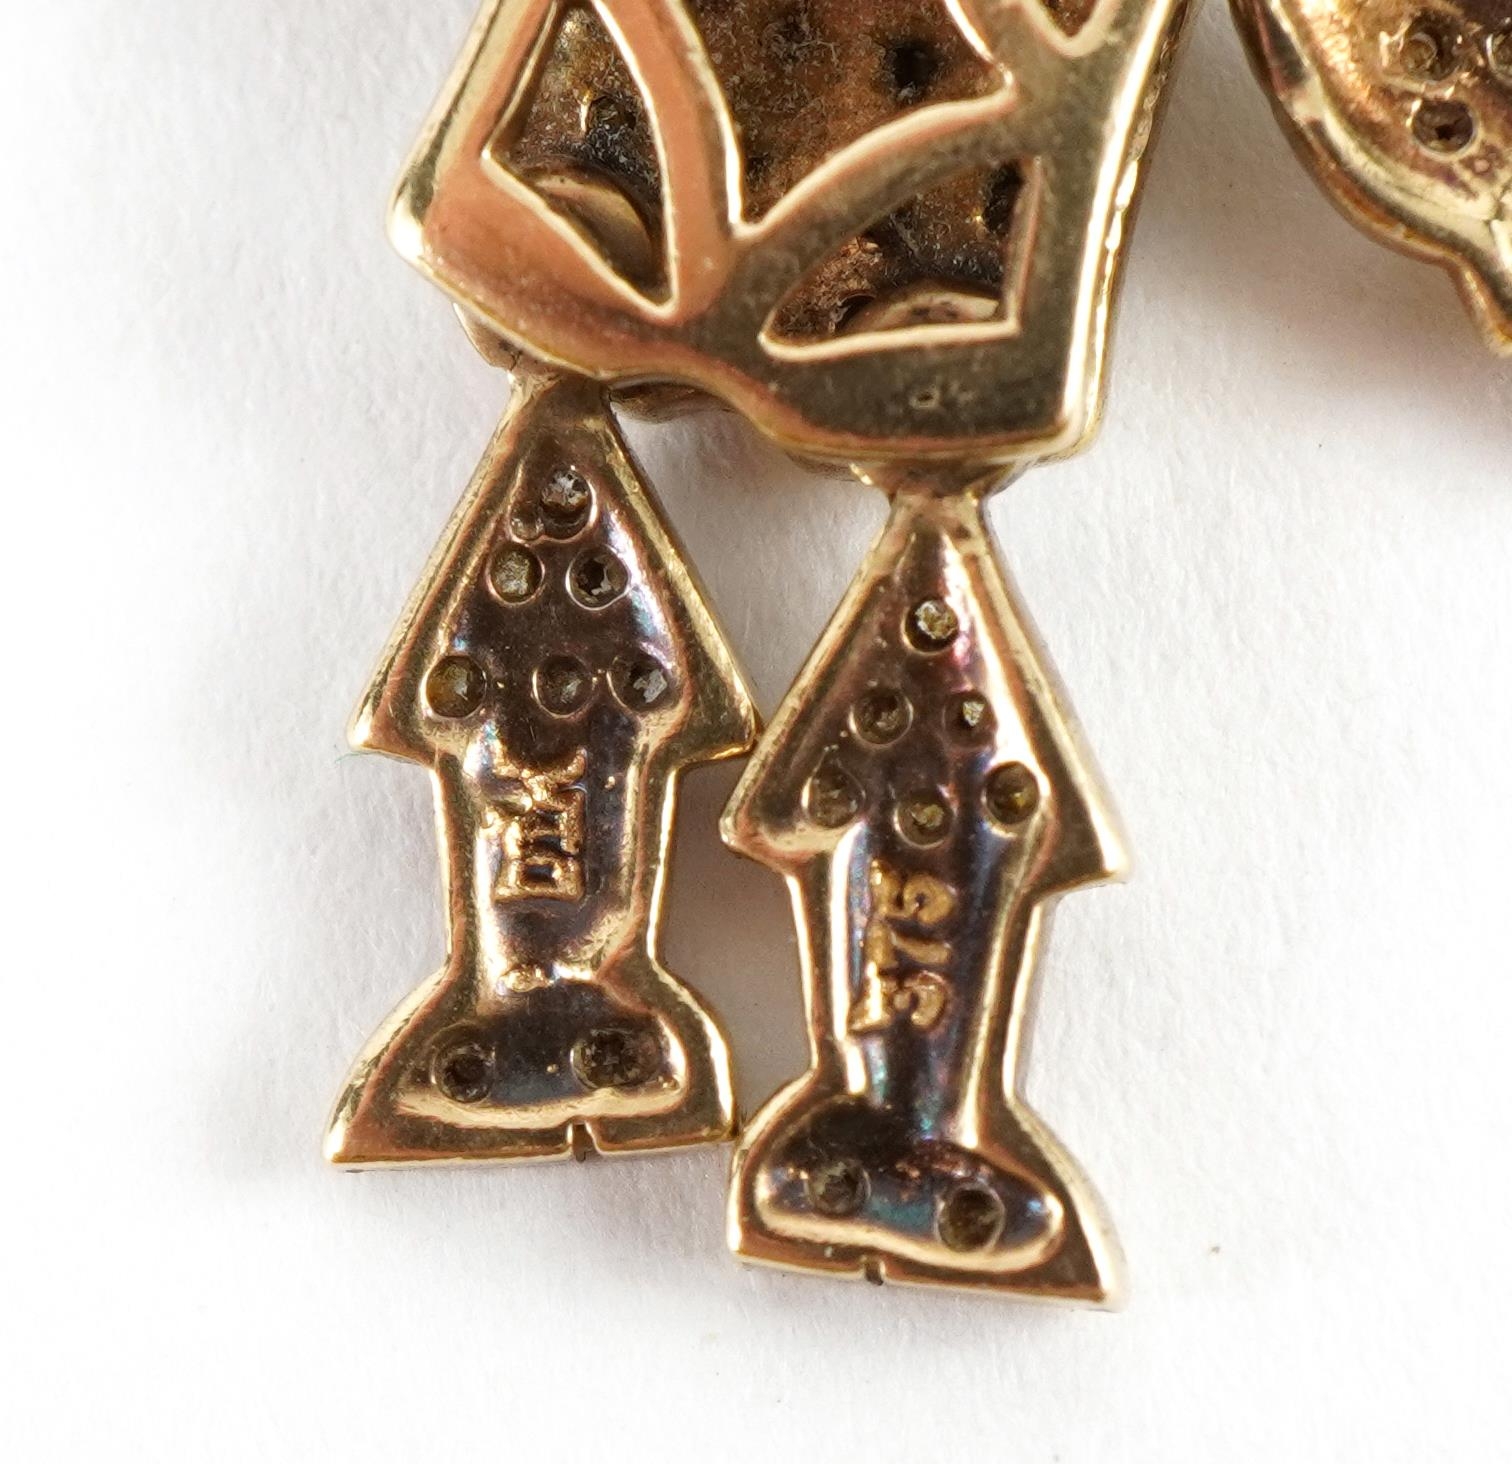 9ct gold diamond clown pendant with sapphire set eyes and articulated limbs, 3.6cm high, 4.9g : - Image 3 of 3